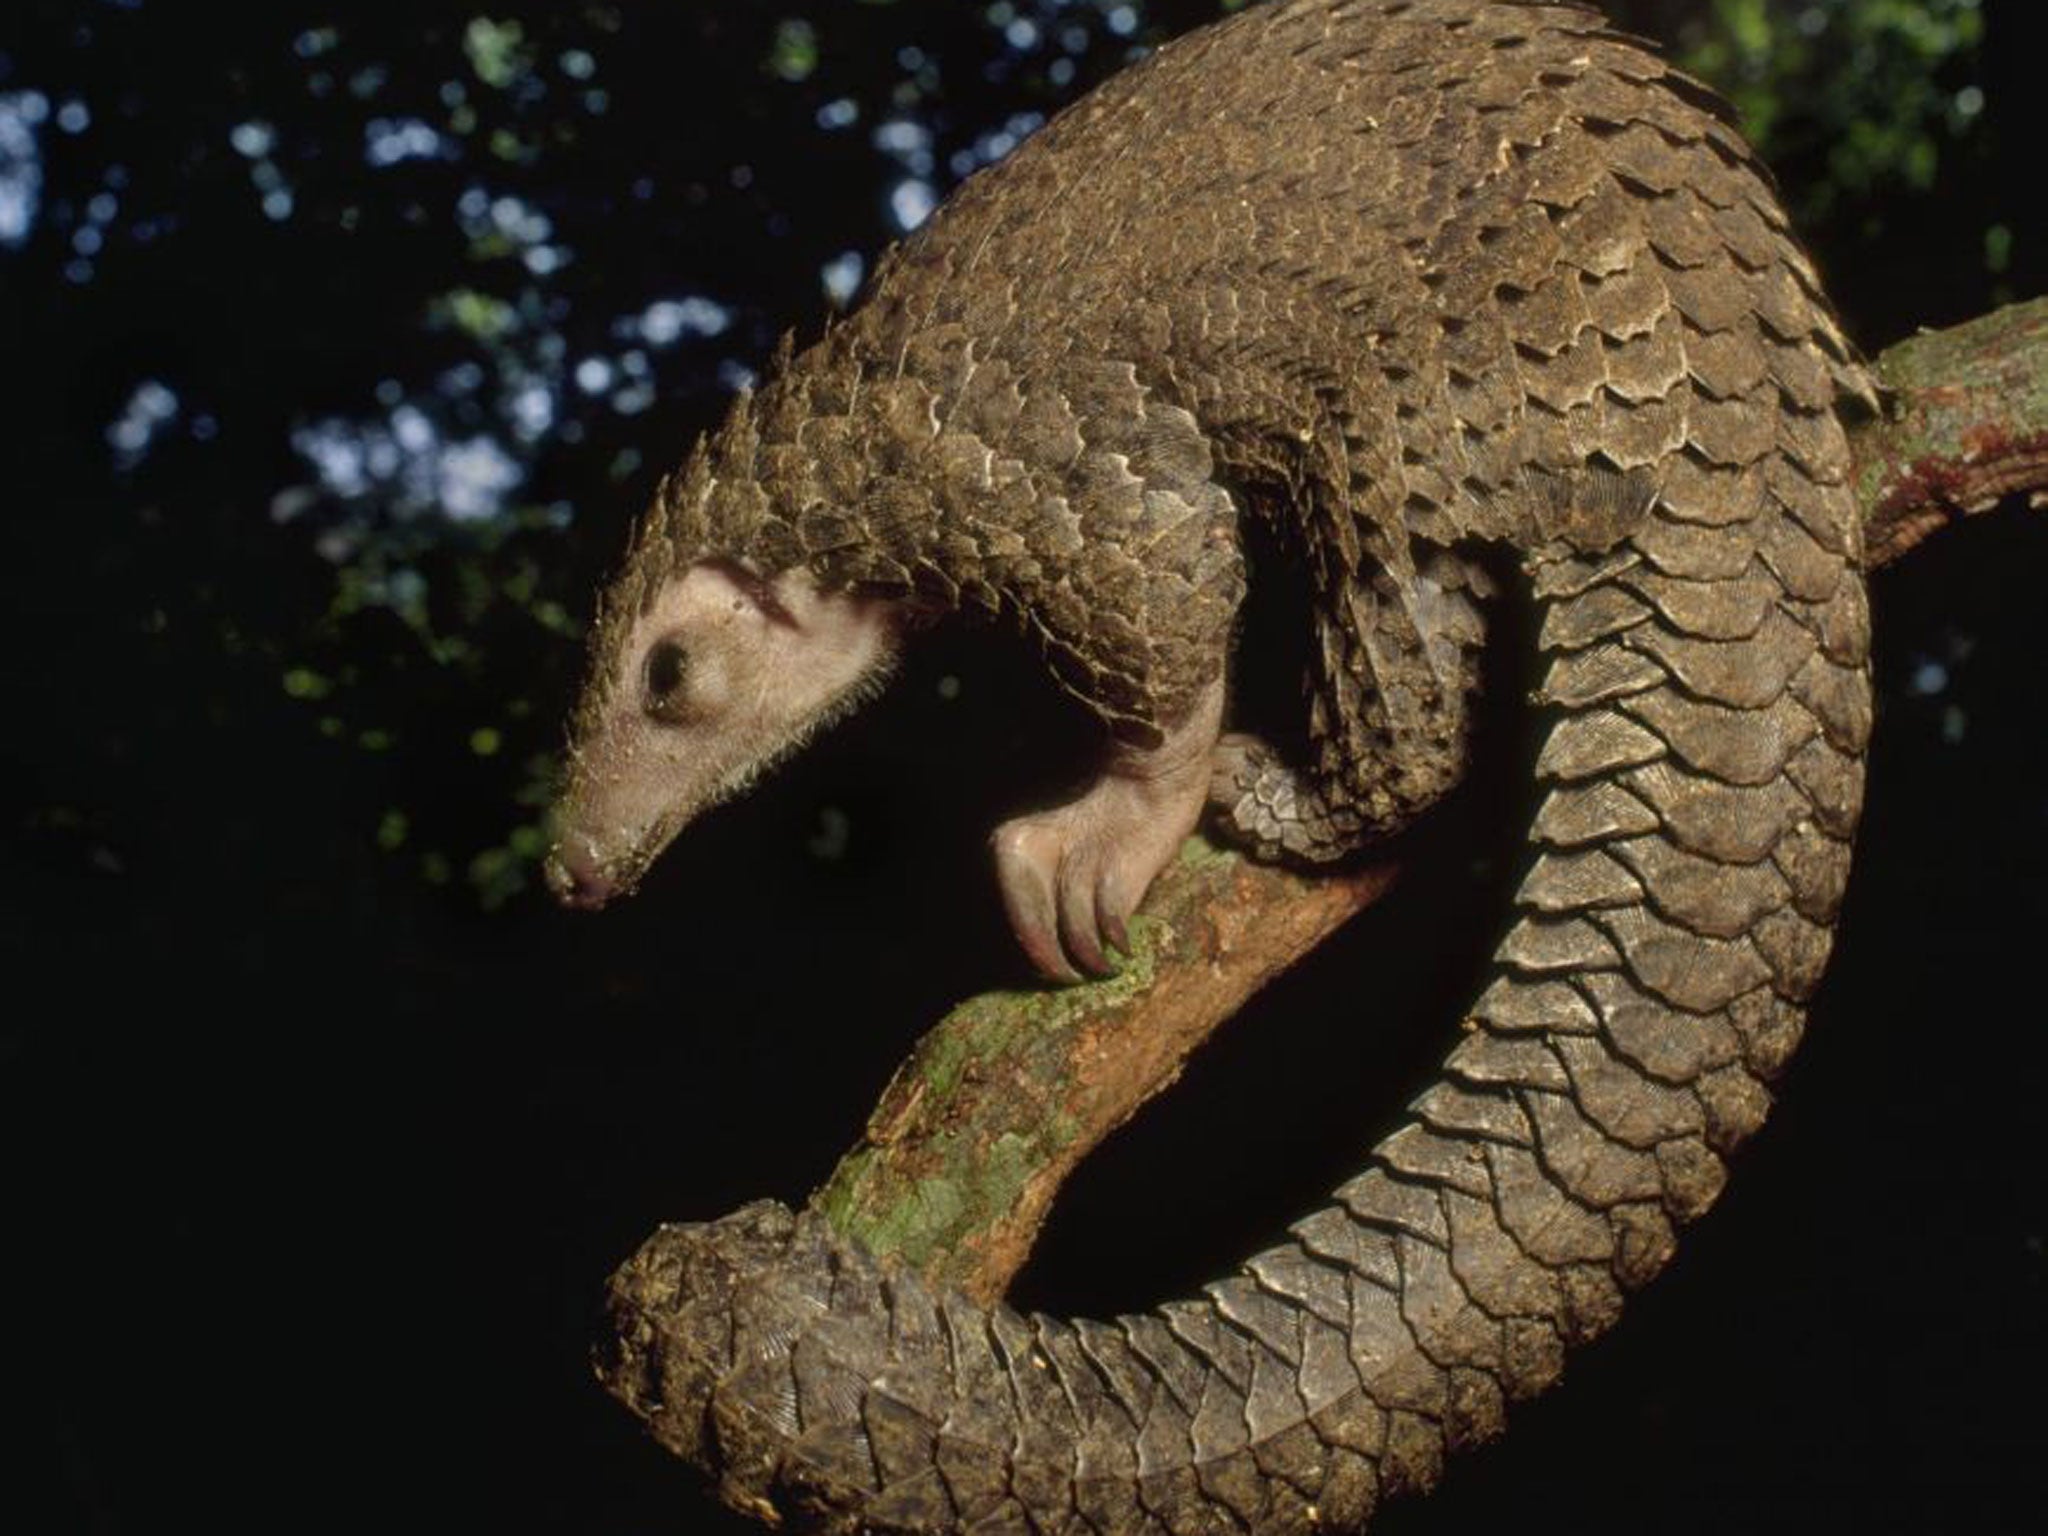 Under threat: the pangolin is the only mammal with reptilian scales